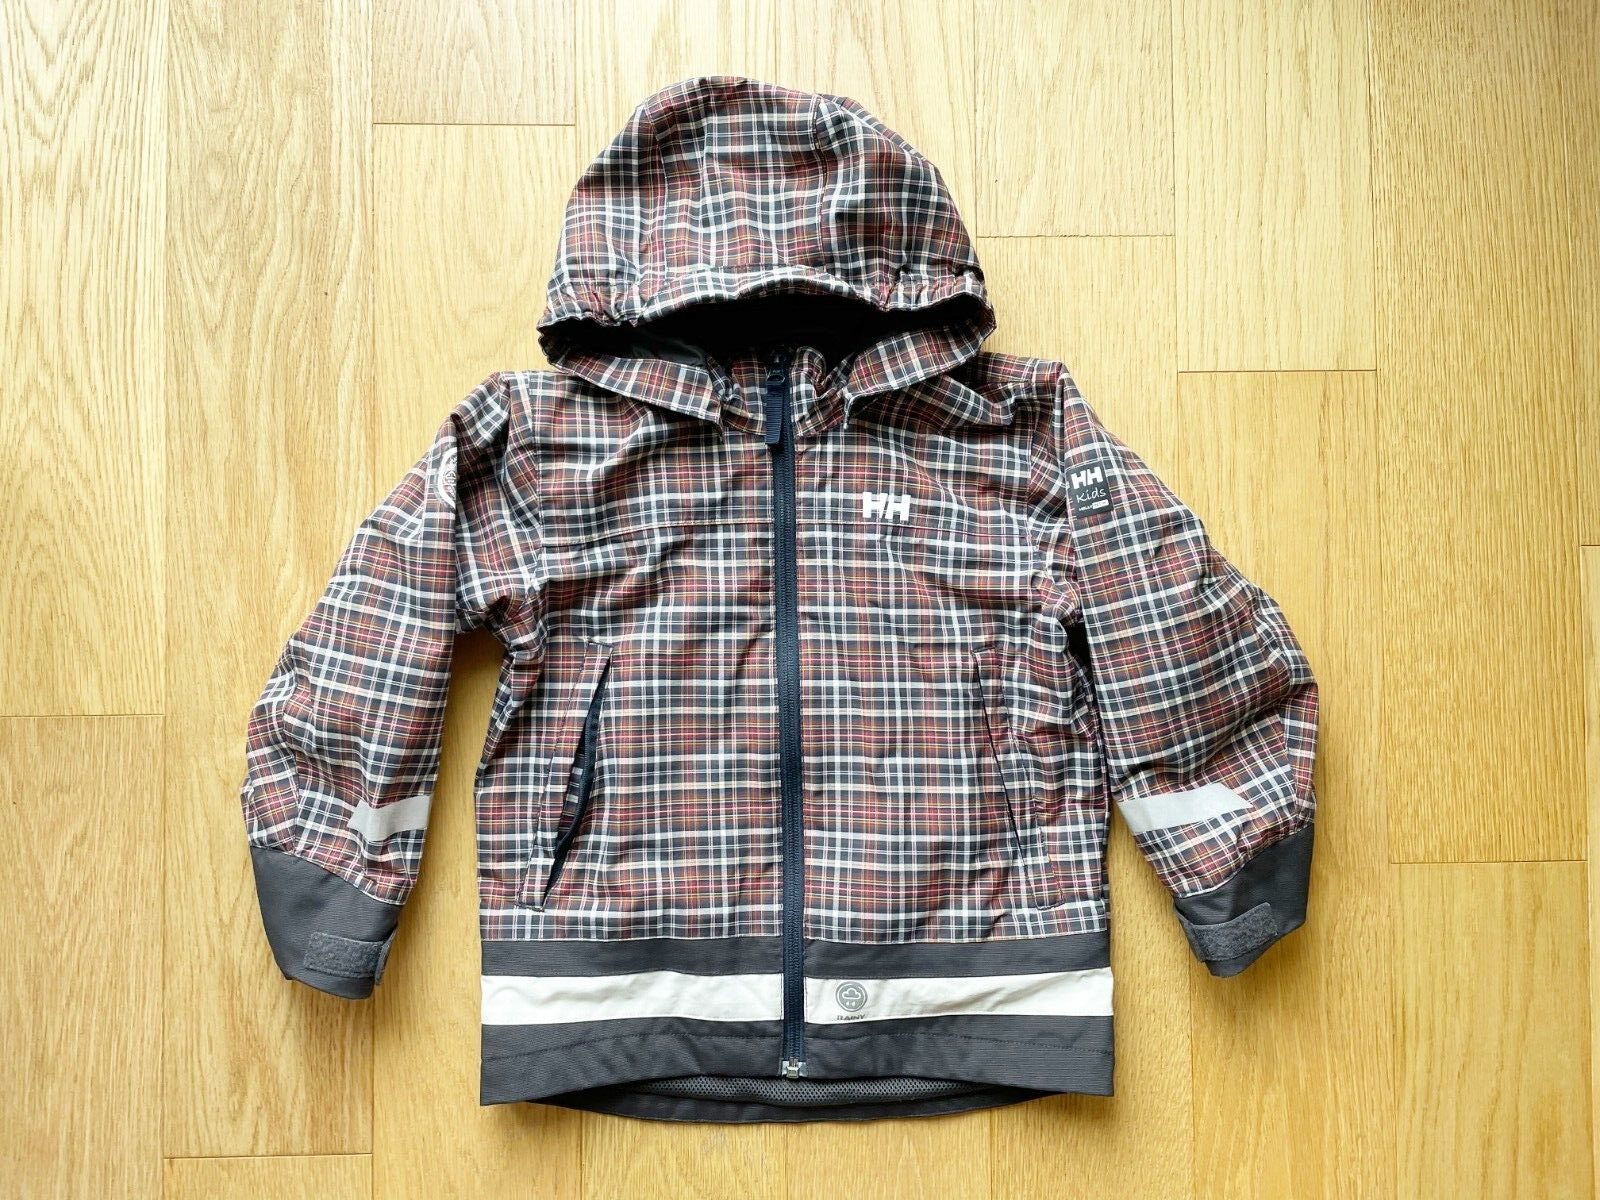 Primary image for Helly Hansen Kids Boys Size 6 Jacket Captain Juell Brown Plaid Lightweight